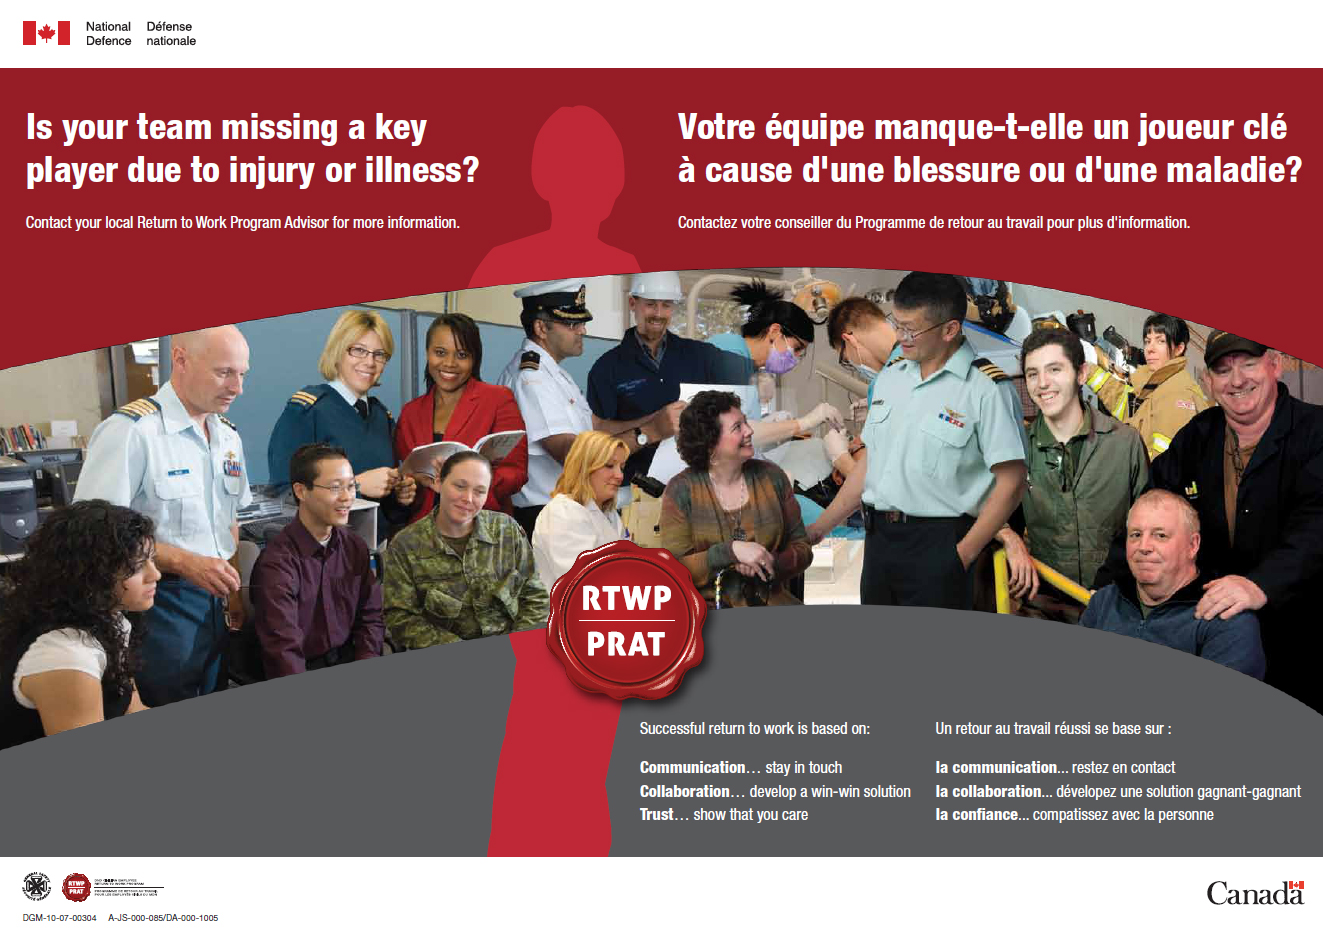 Department of National Defence Poster in Support of Return to Work After Injury or Illness. Text version below: